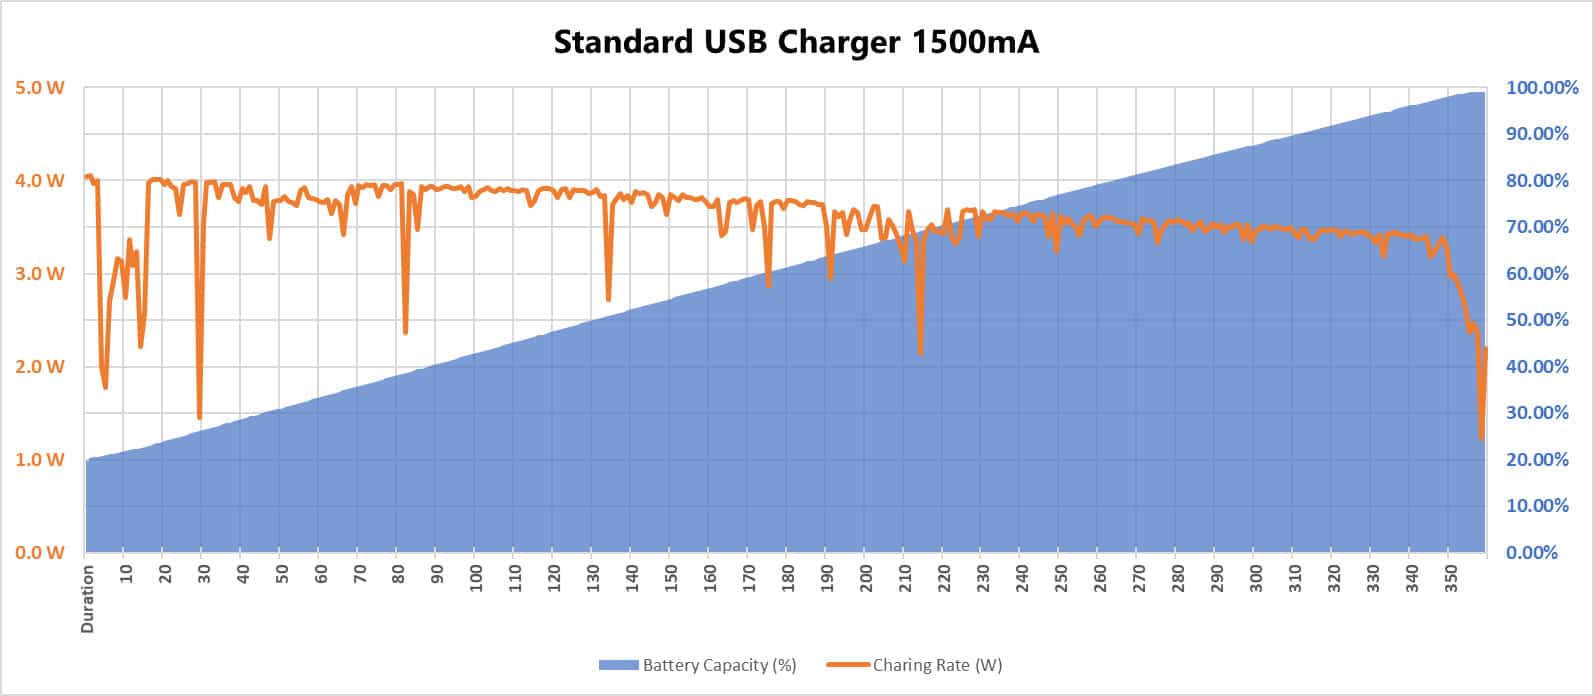 Sony 1500mA charging rate